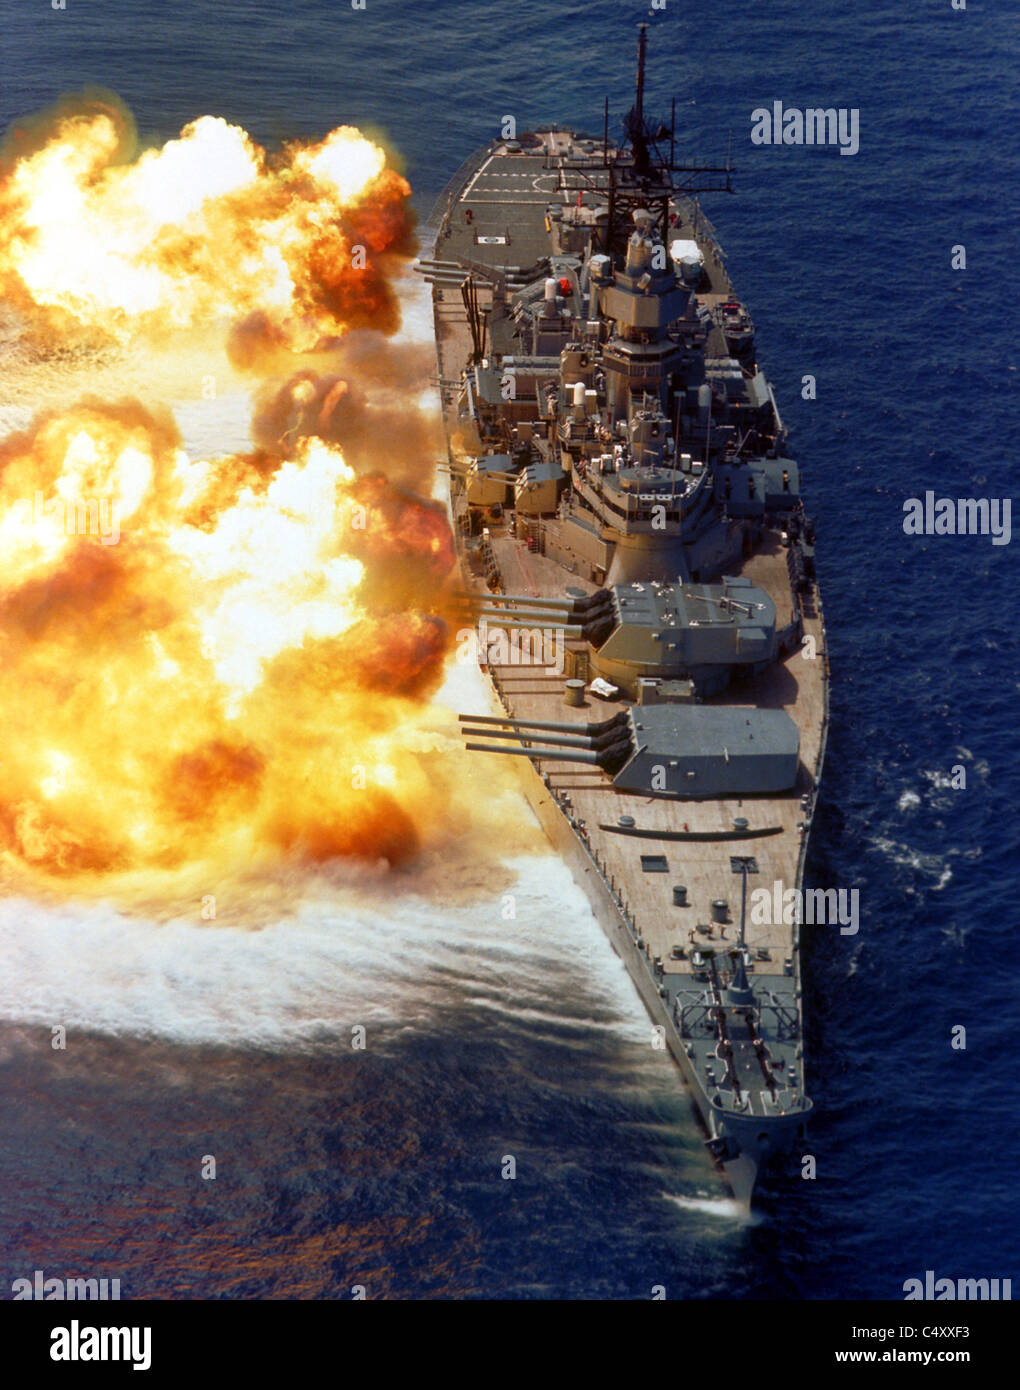 USS IOWA firing its Mark 7 16-inch/50-caliber guns off the starboard side during a fire power demonstration Stock Photo